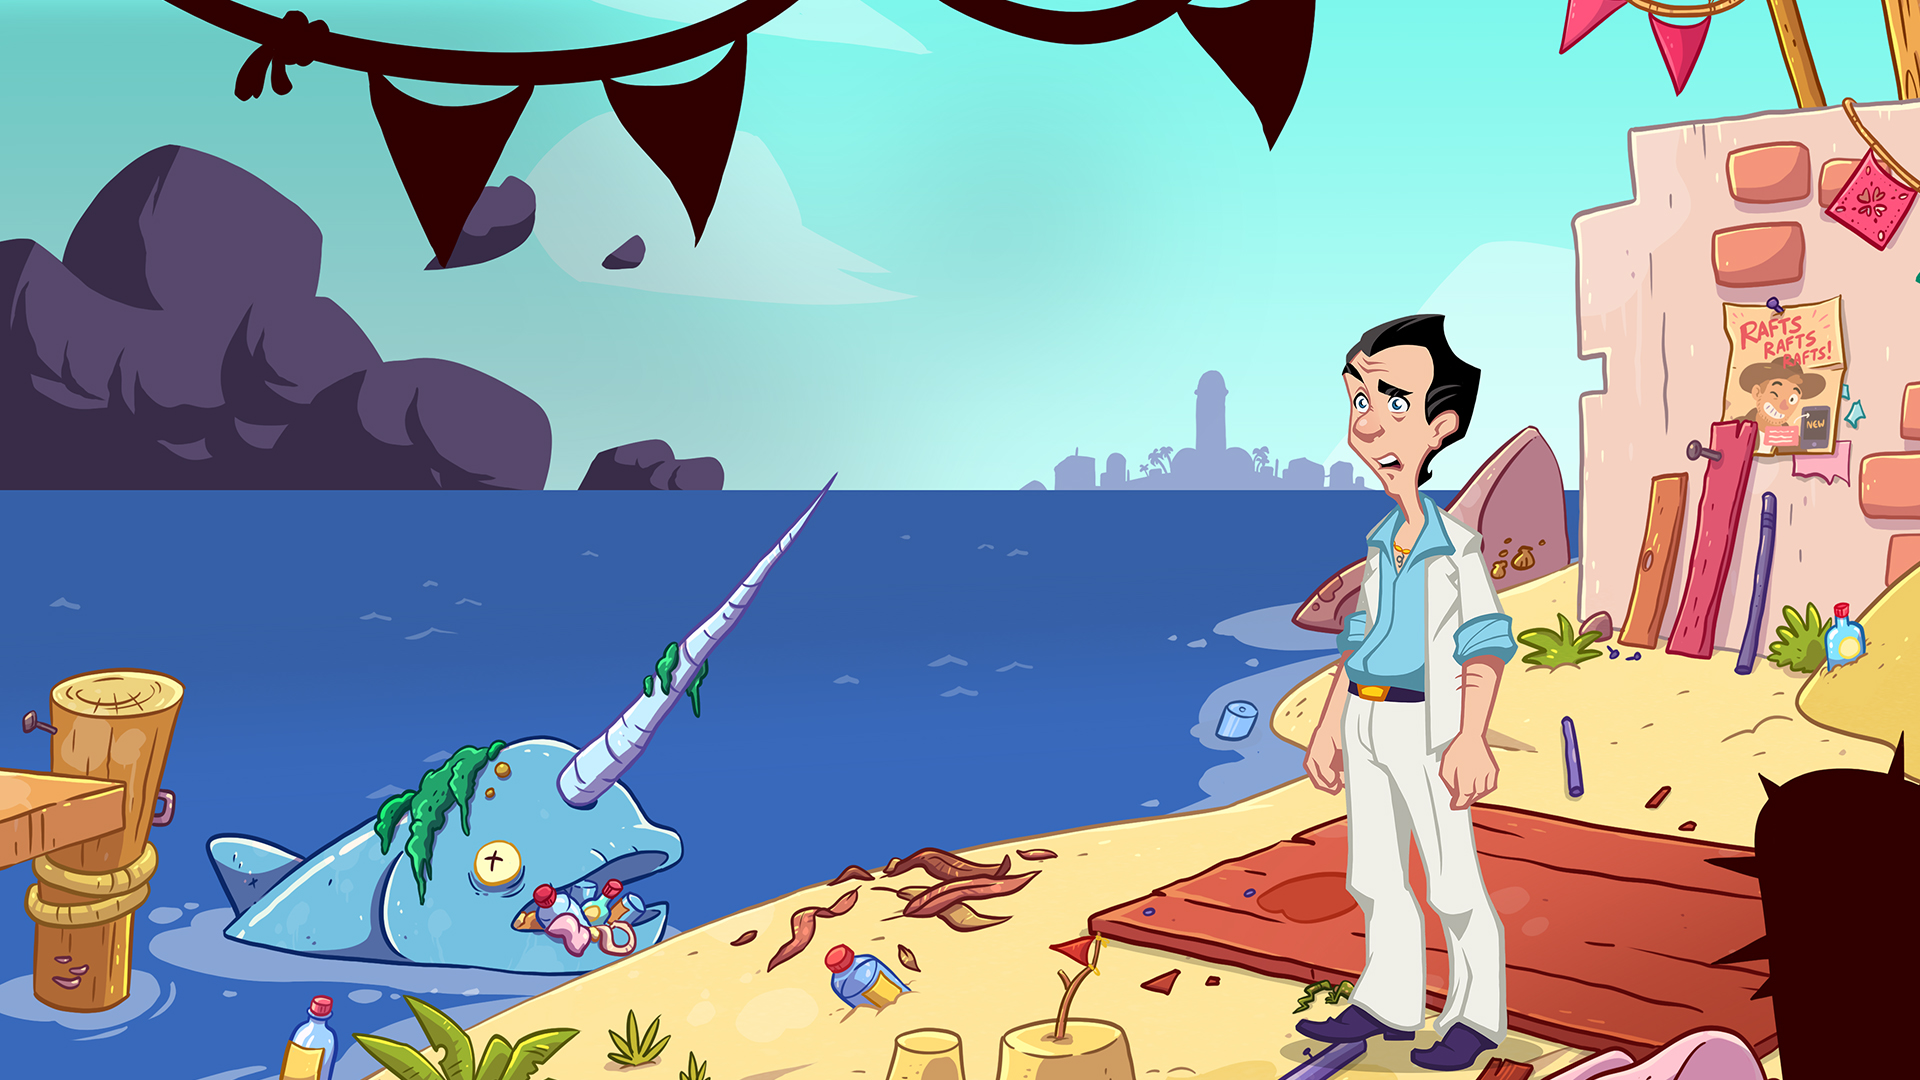 ‘Leisure Suit Larry’ Is Back for an All-New Dirty-Talkin’ Title, Revealed in First Trailer